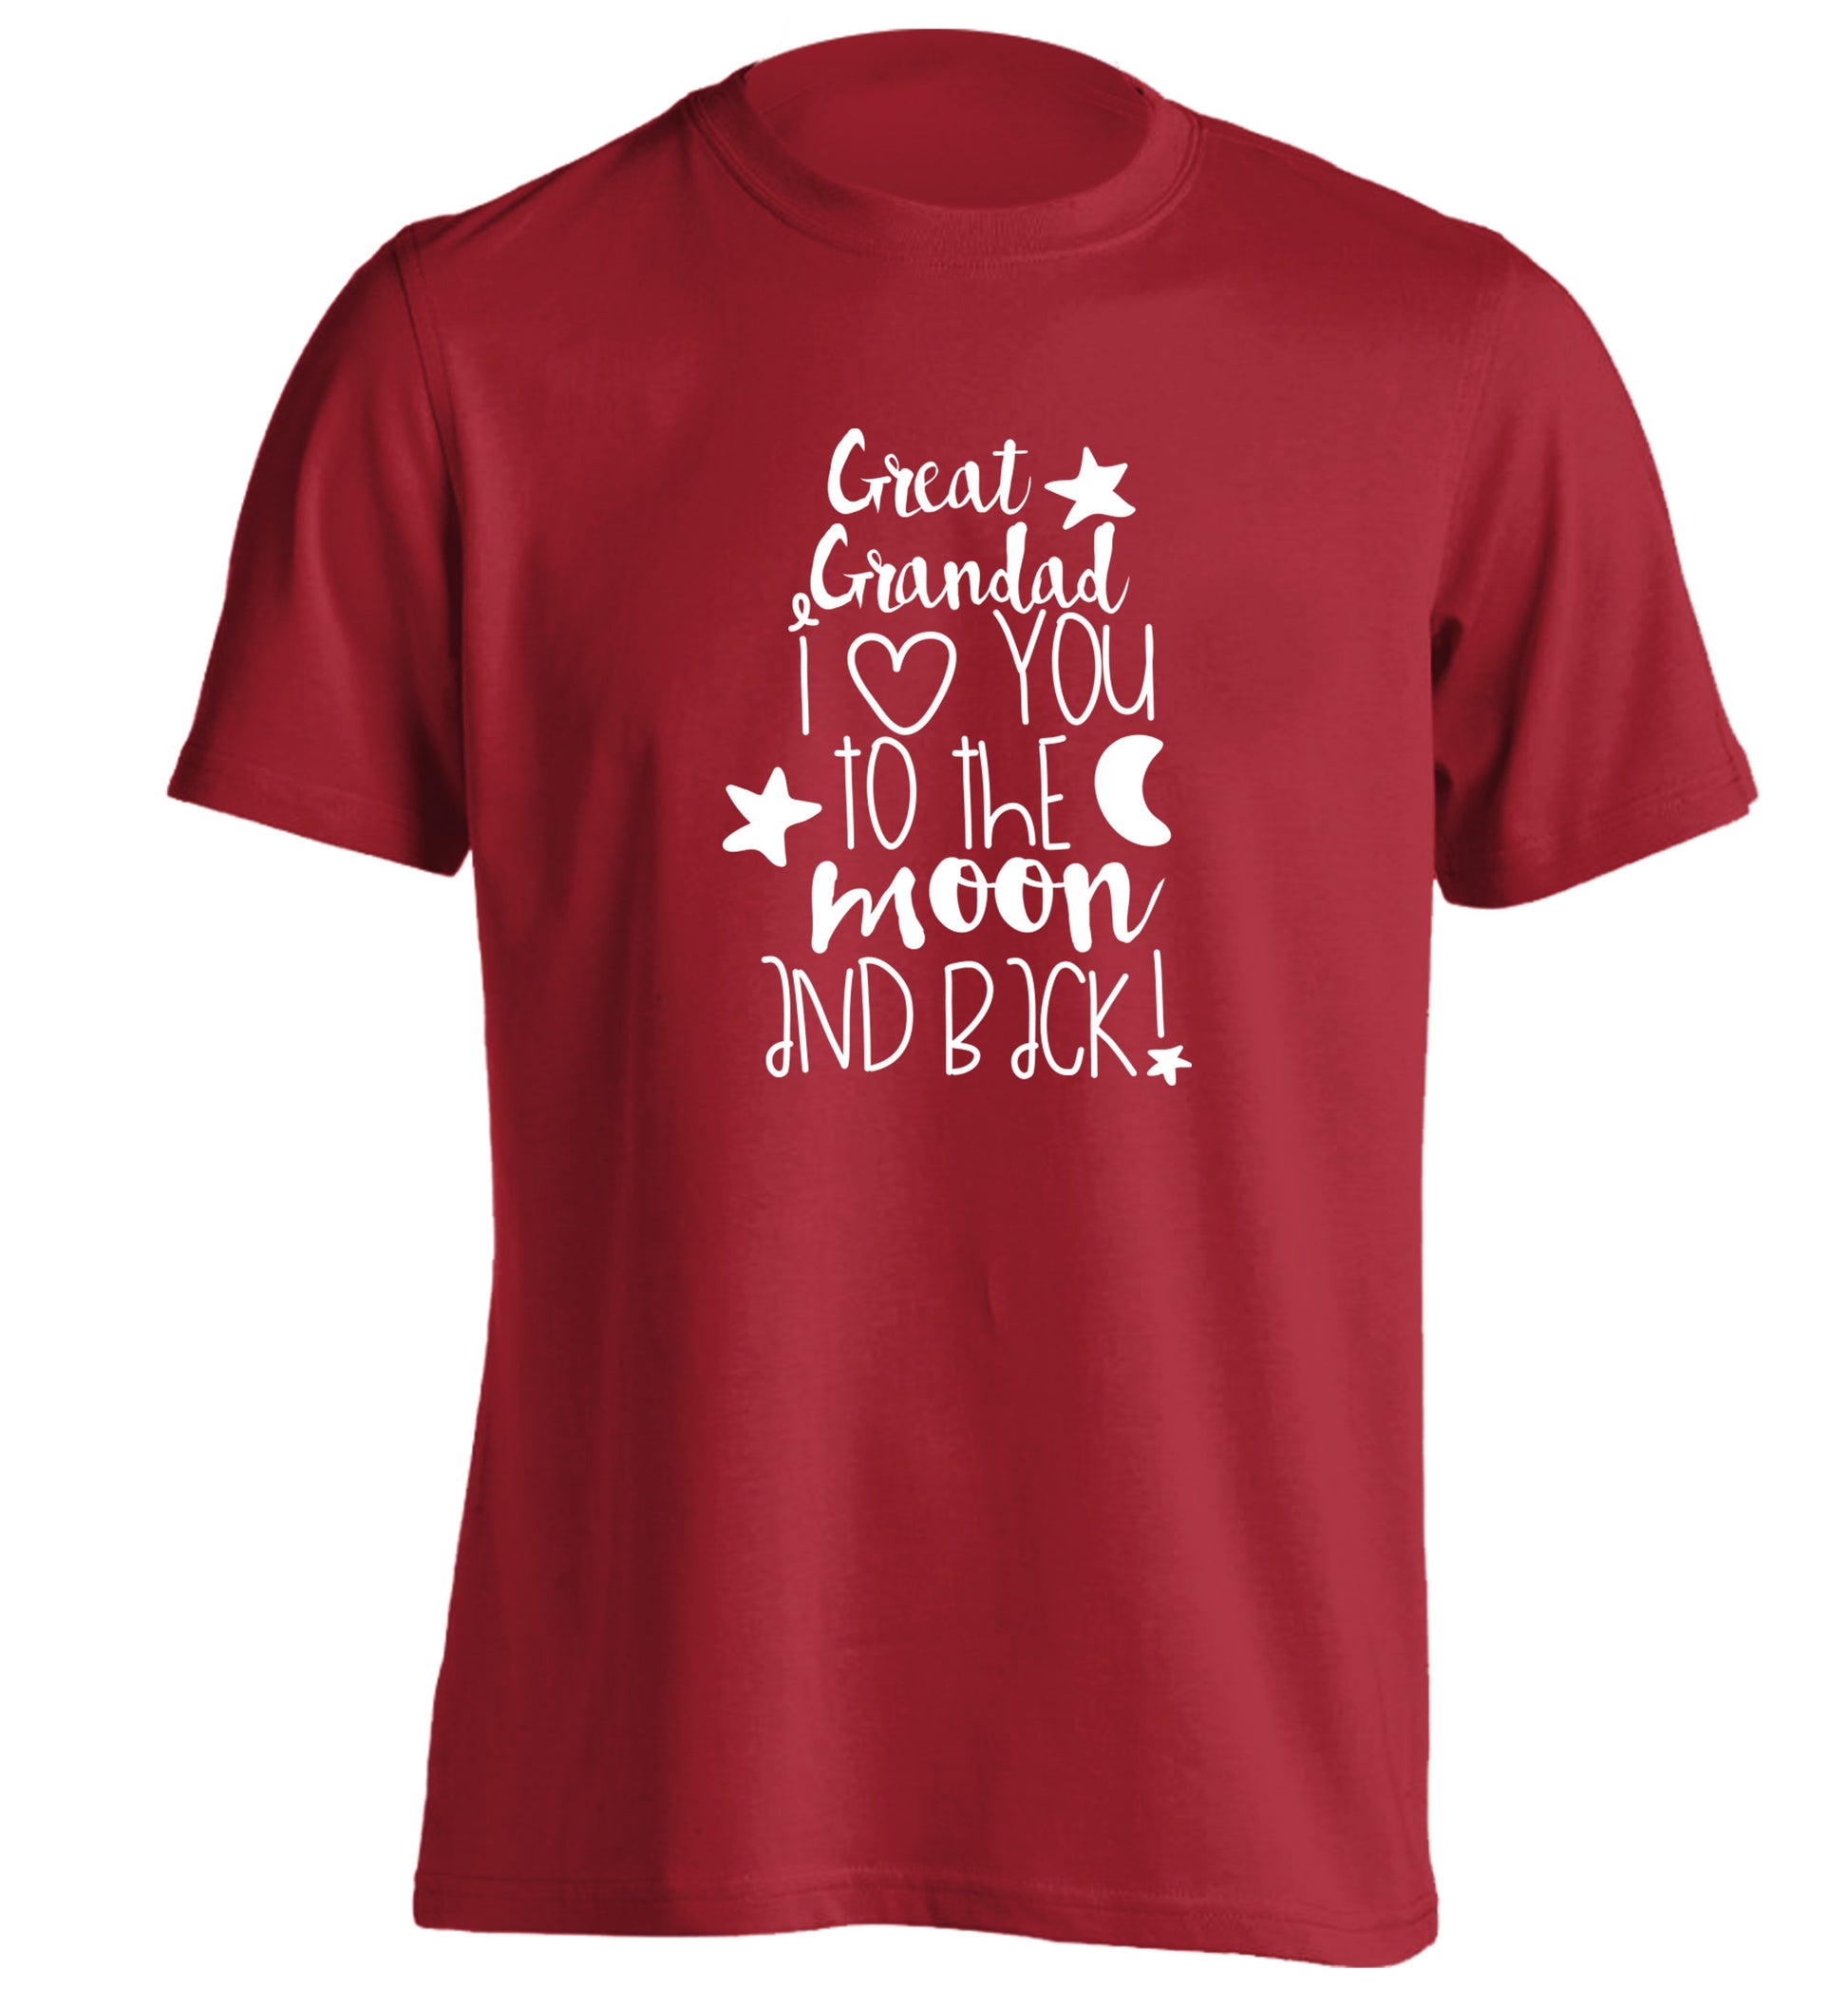 Great Grandad I love you to the moon and back adults unisex red Tshirt 2XL